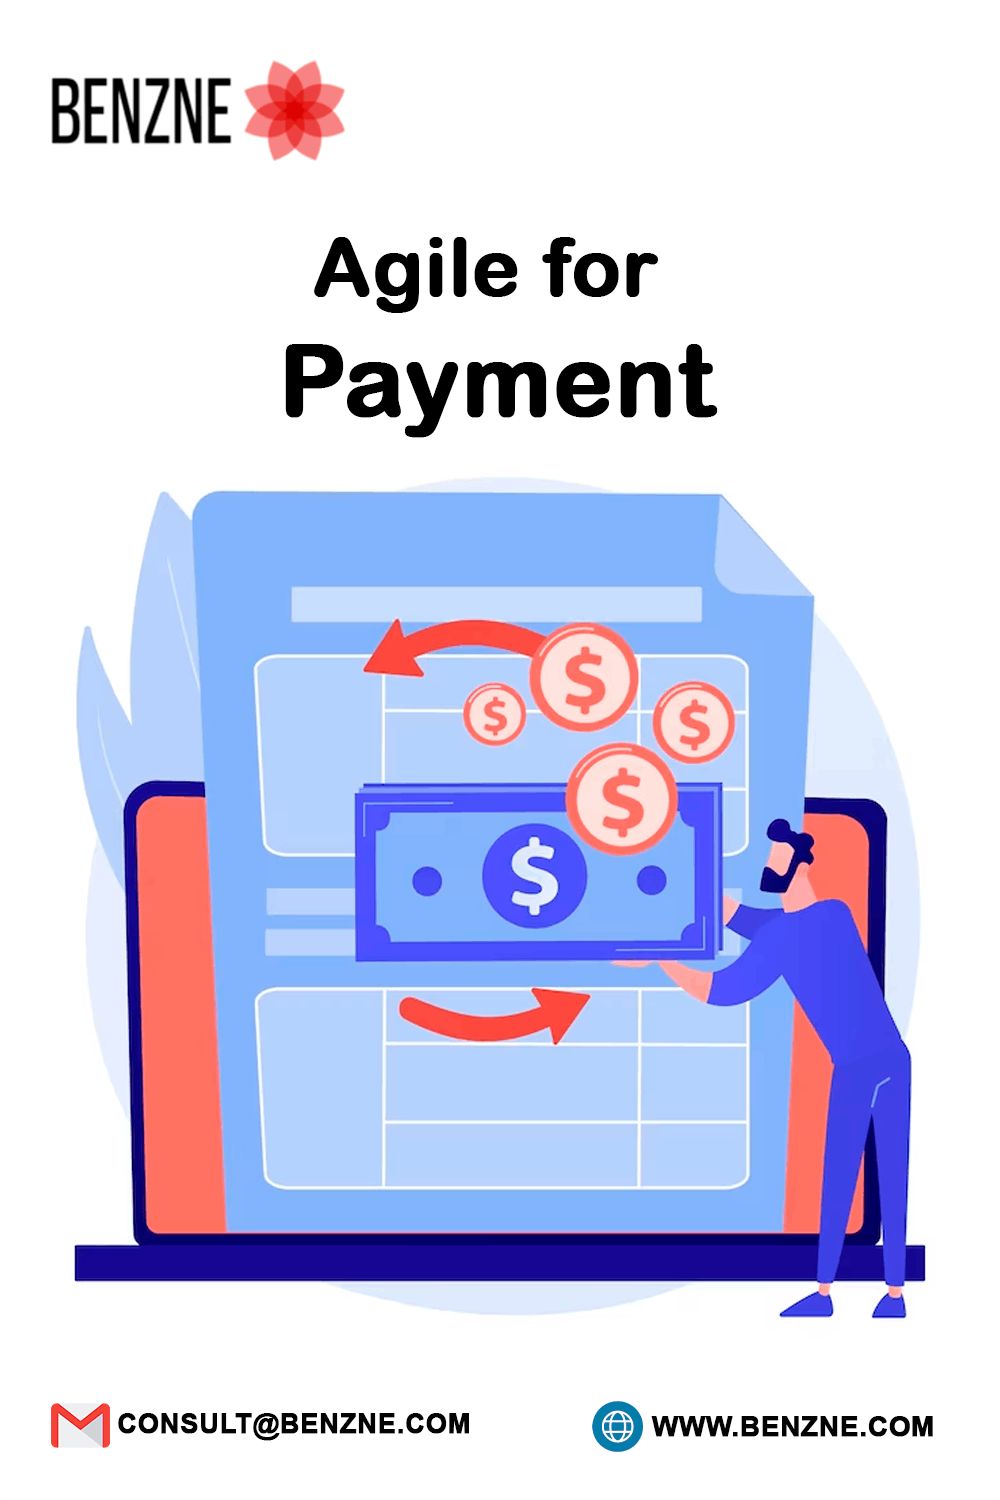 Agile For Payments With Benzne To Enable The Digital Finance Adoption With Ease